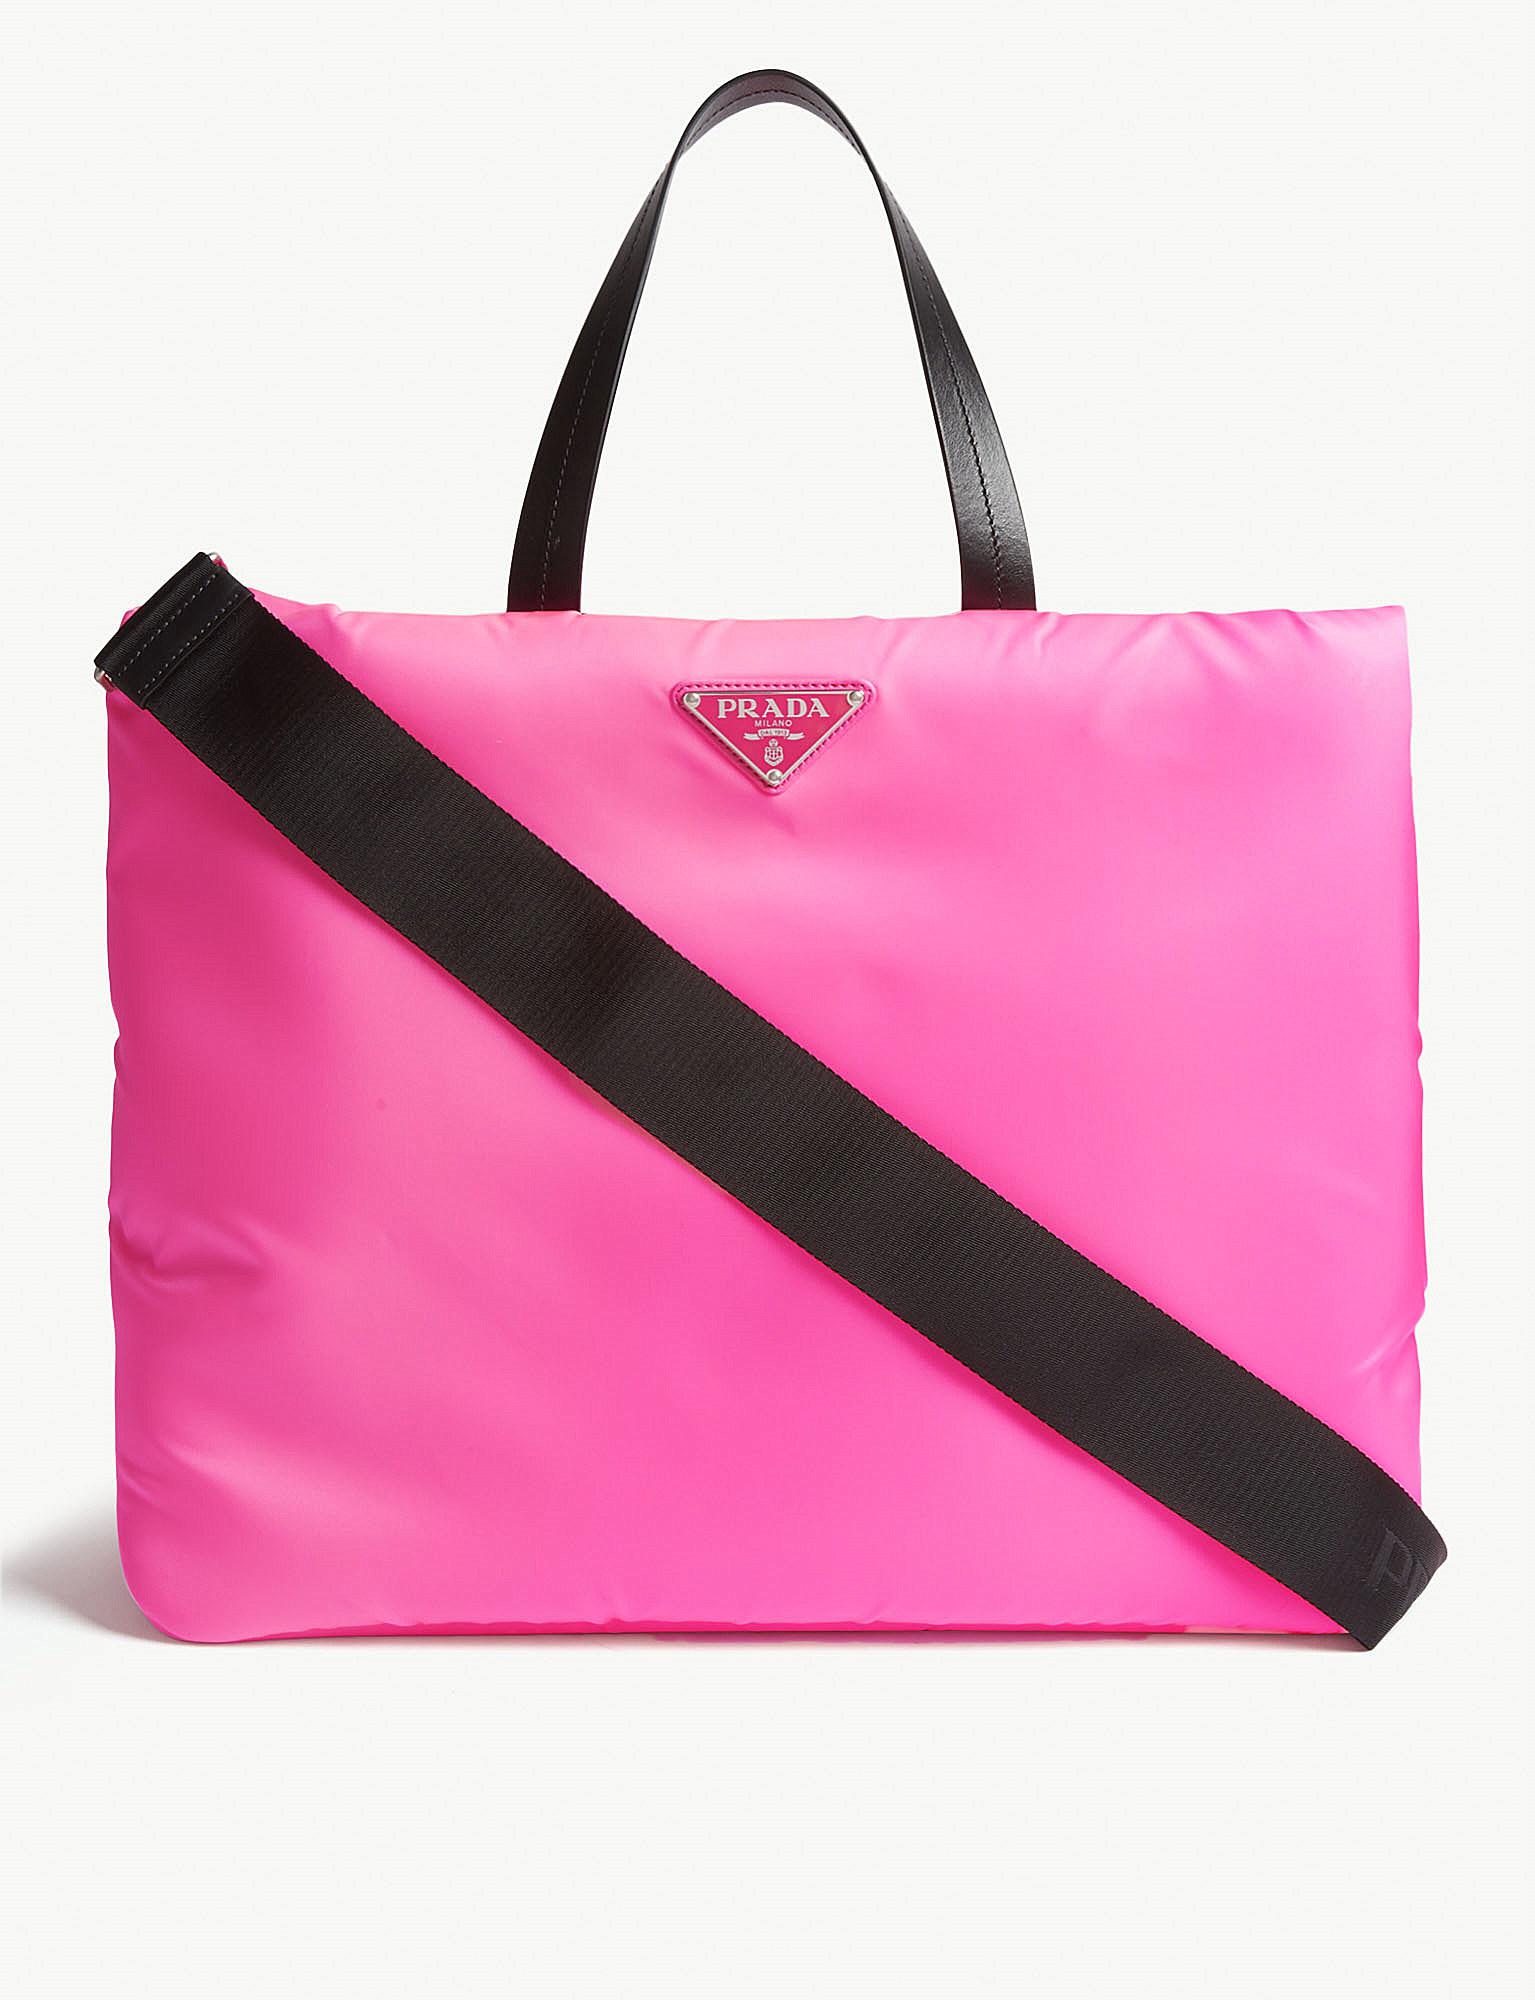 Prada Synthetic Neon Tote in Neon Pink 